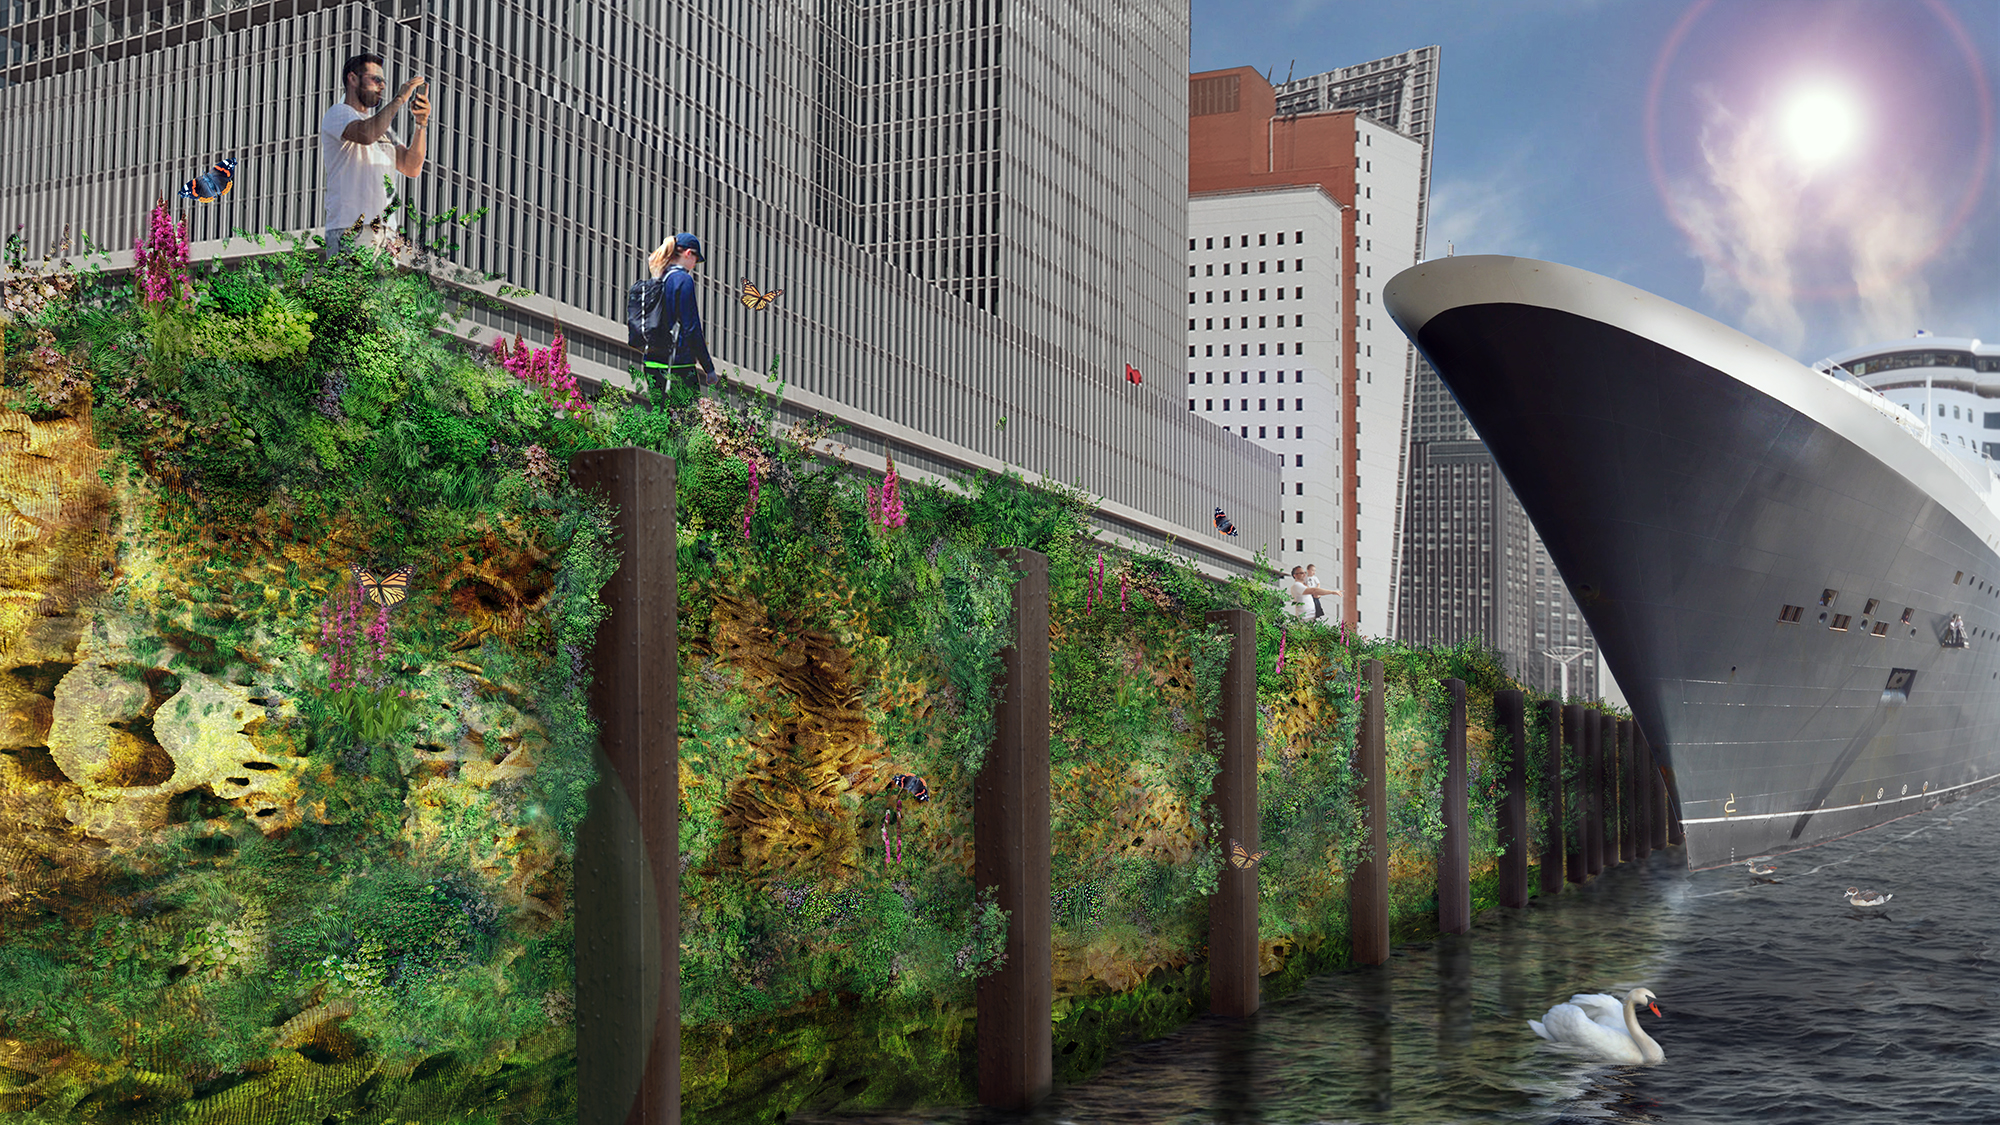 A rendering of a port covered in algae sculptures, a cruise ship is nearby.